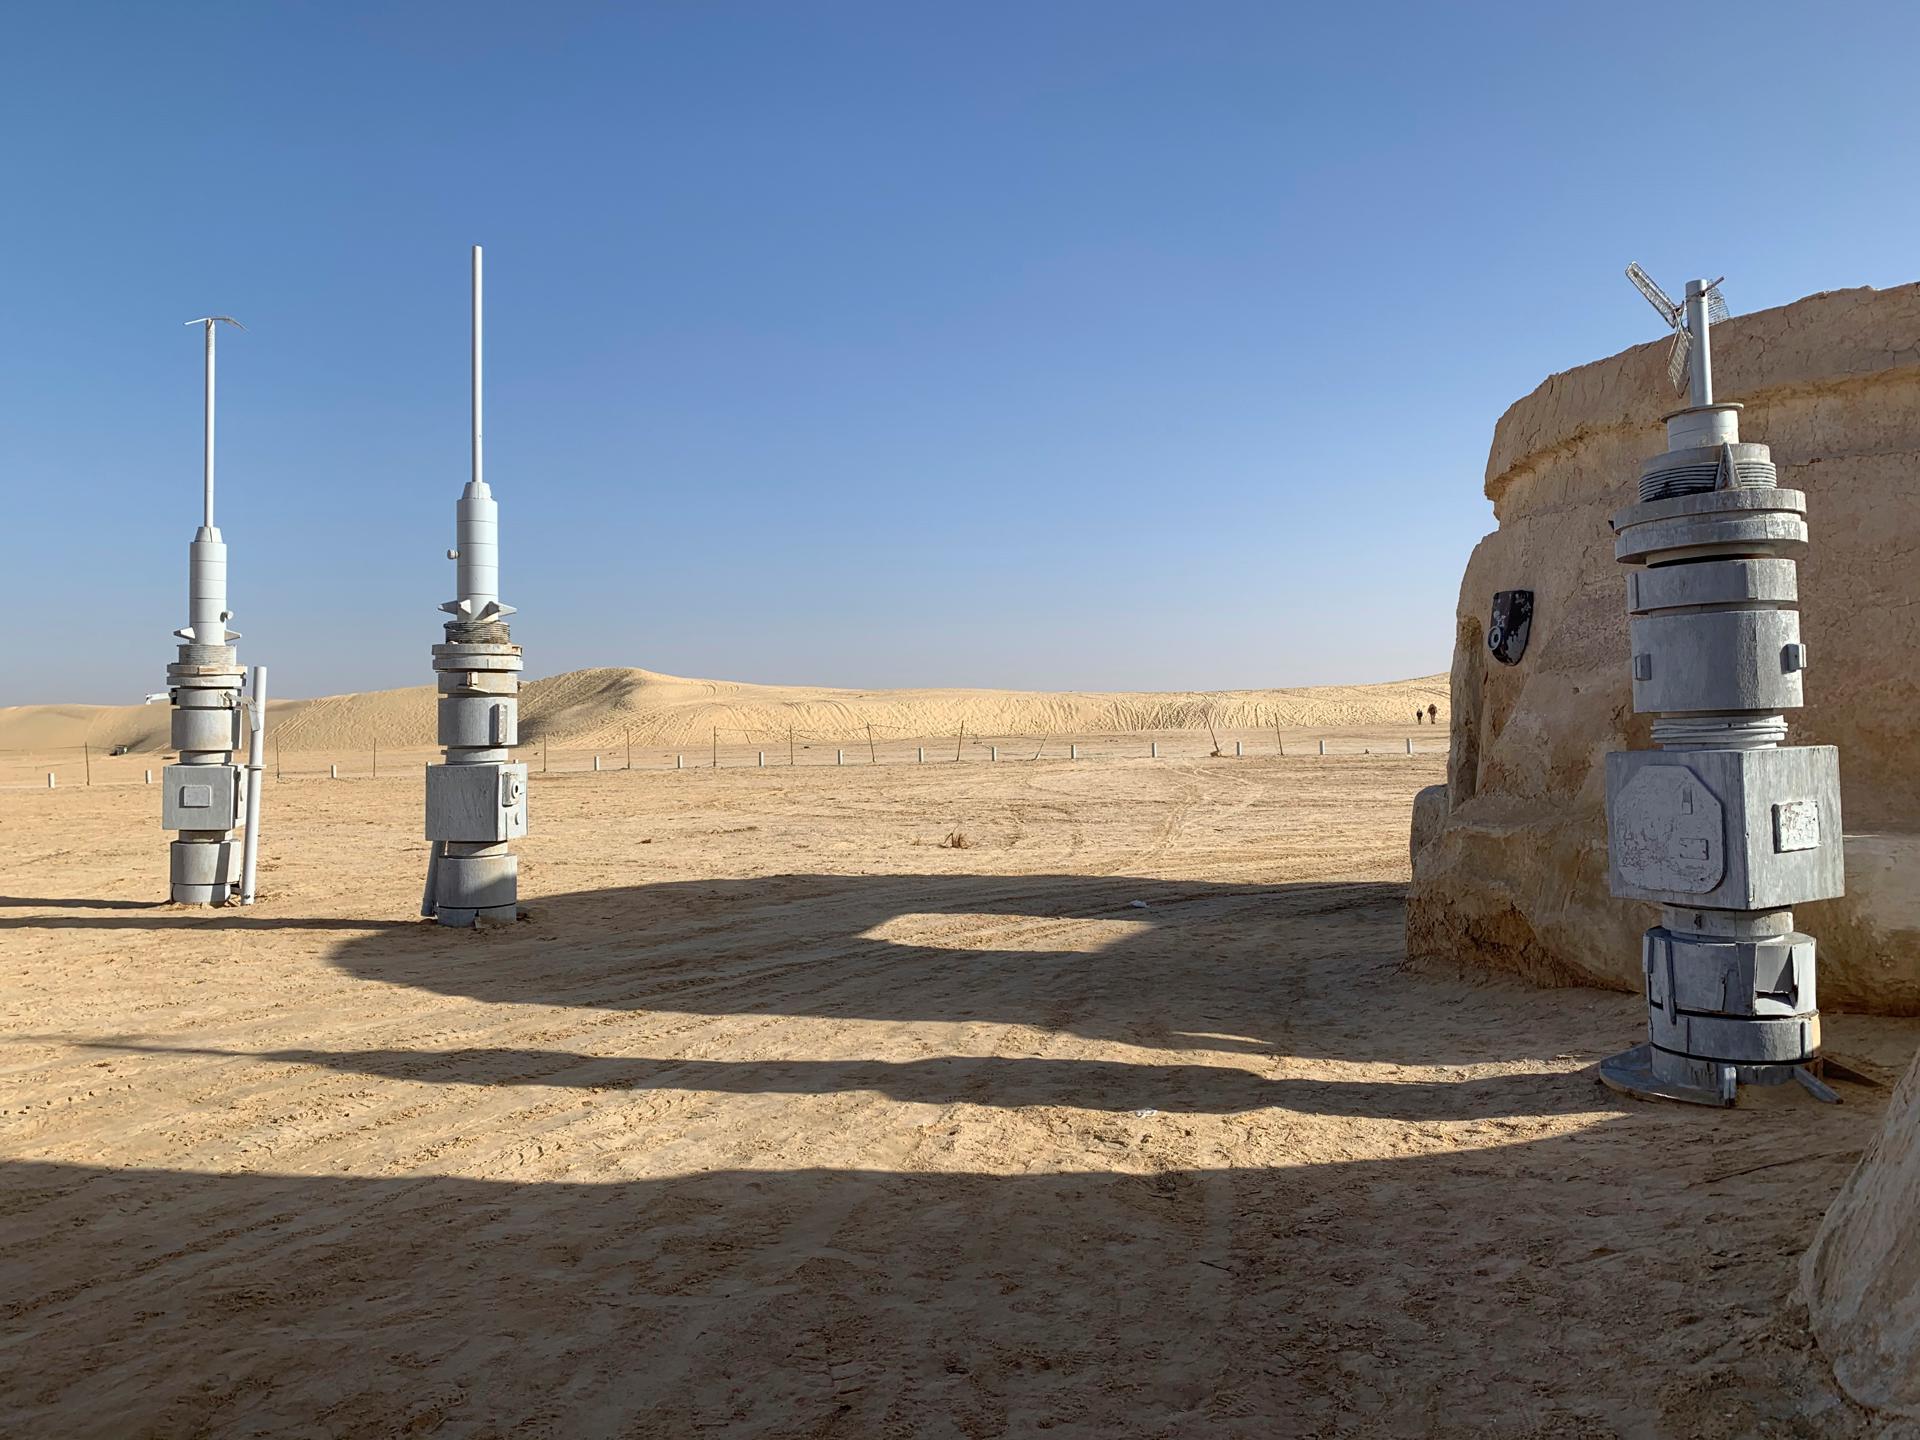 They find a new planet similar to Tatooine from “Star Wars”